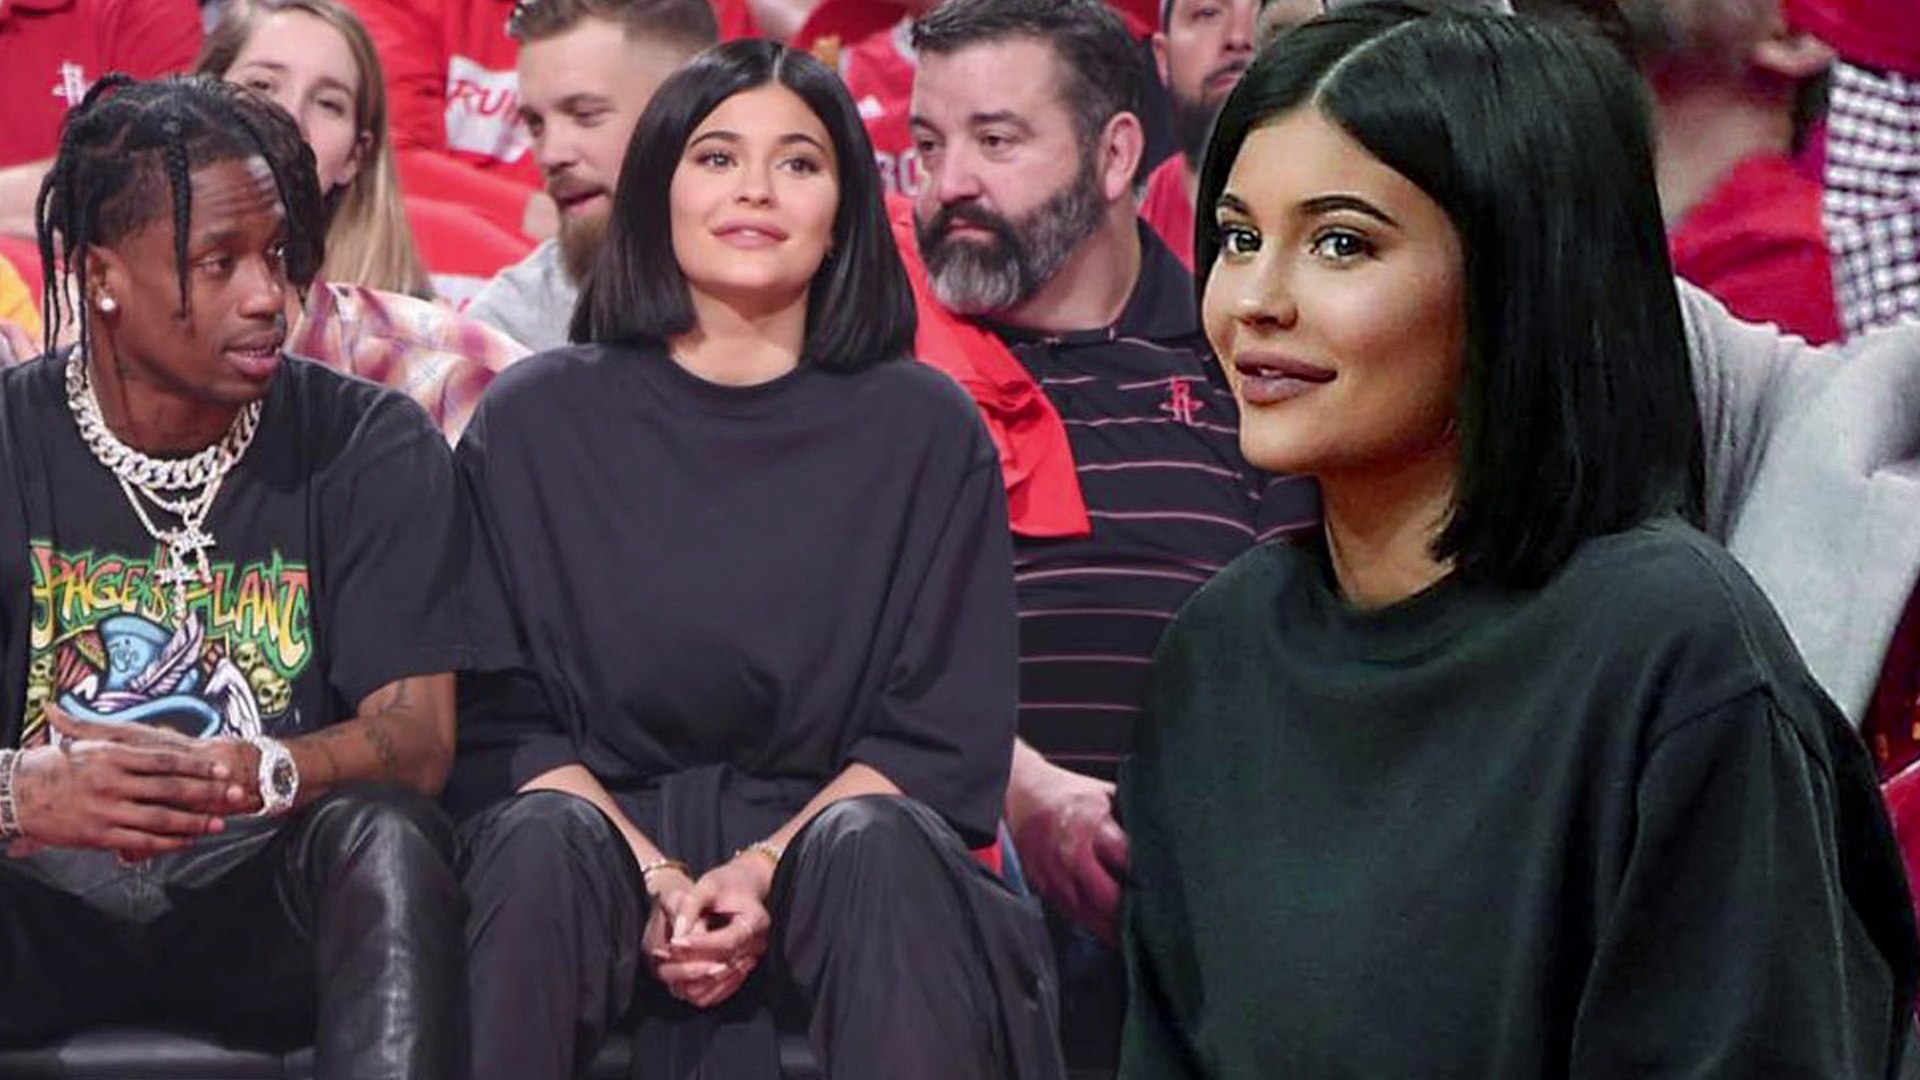 Kylie Jenner and Travis Scott attend basketball game after being mom-shamed for going to Coachella.